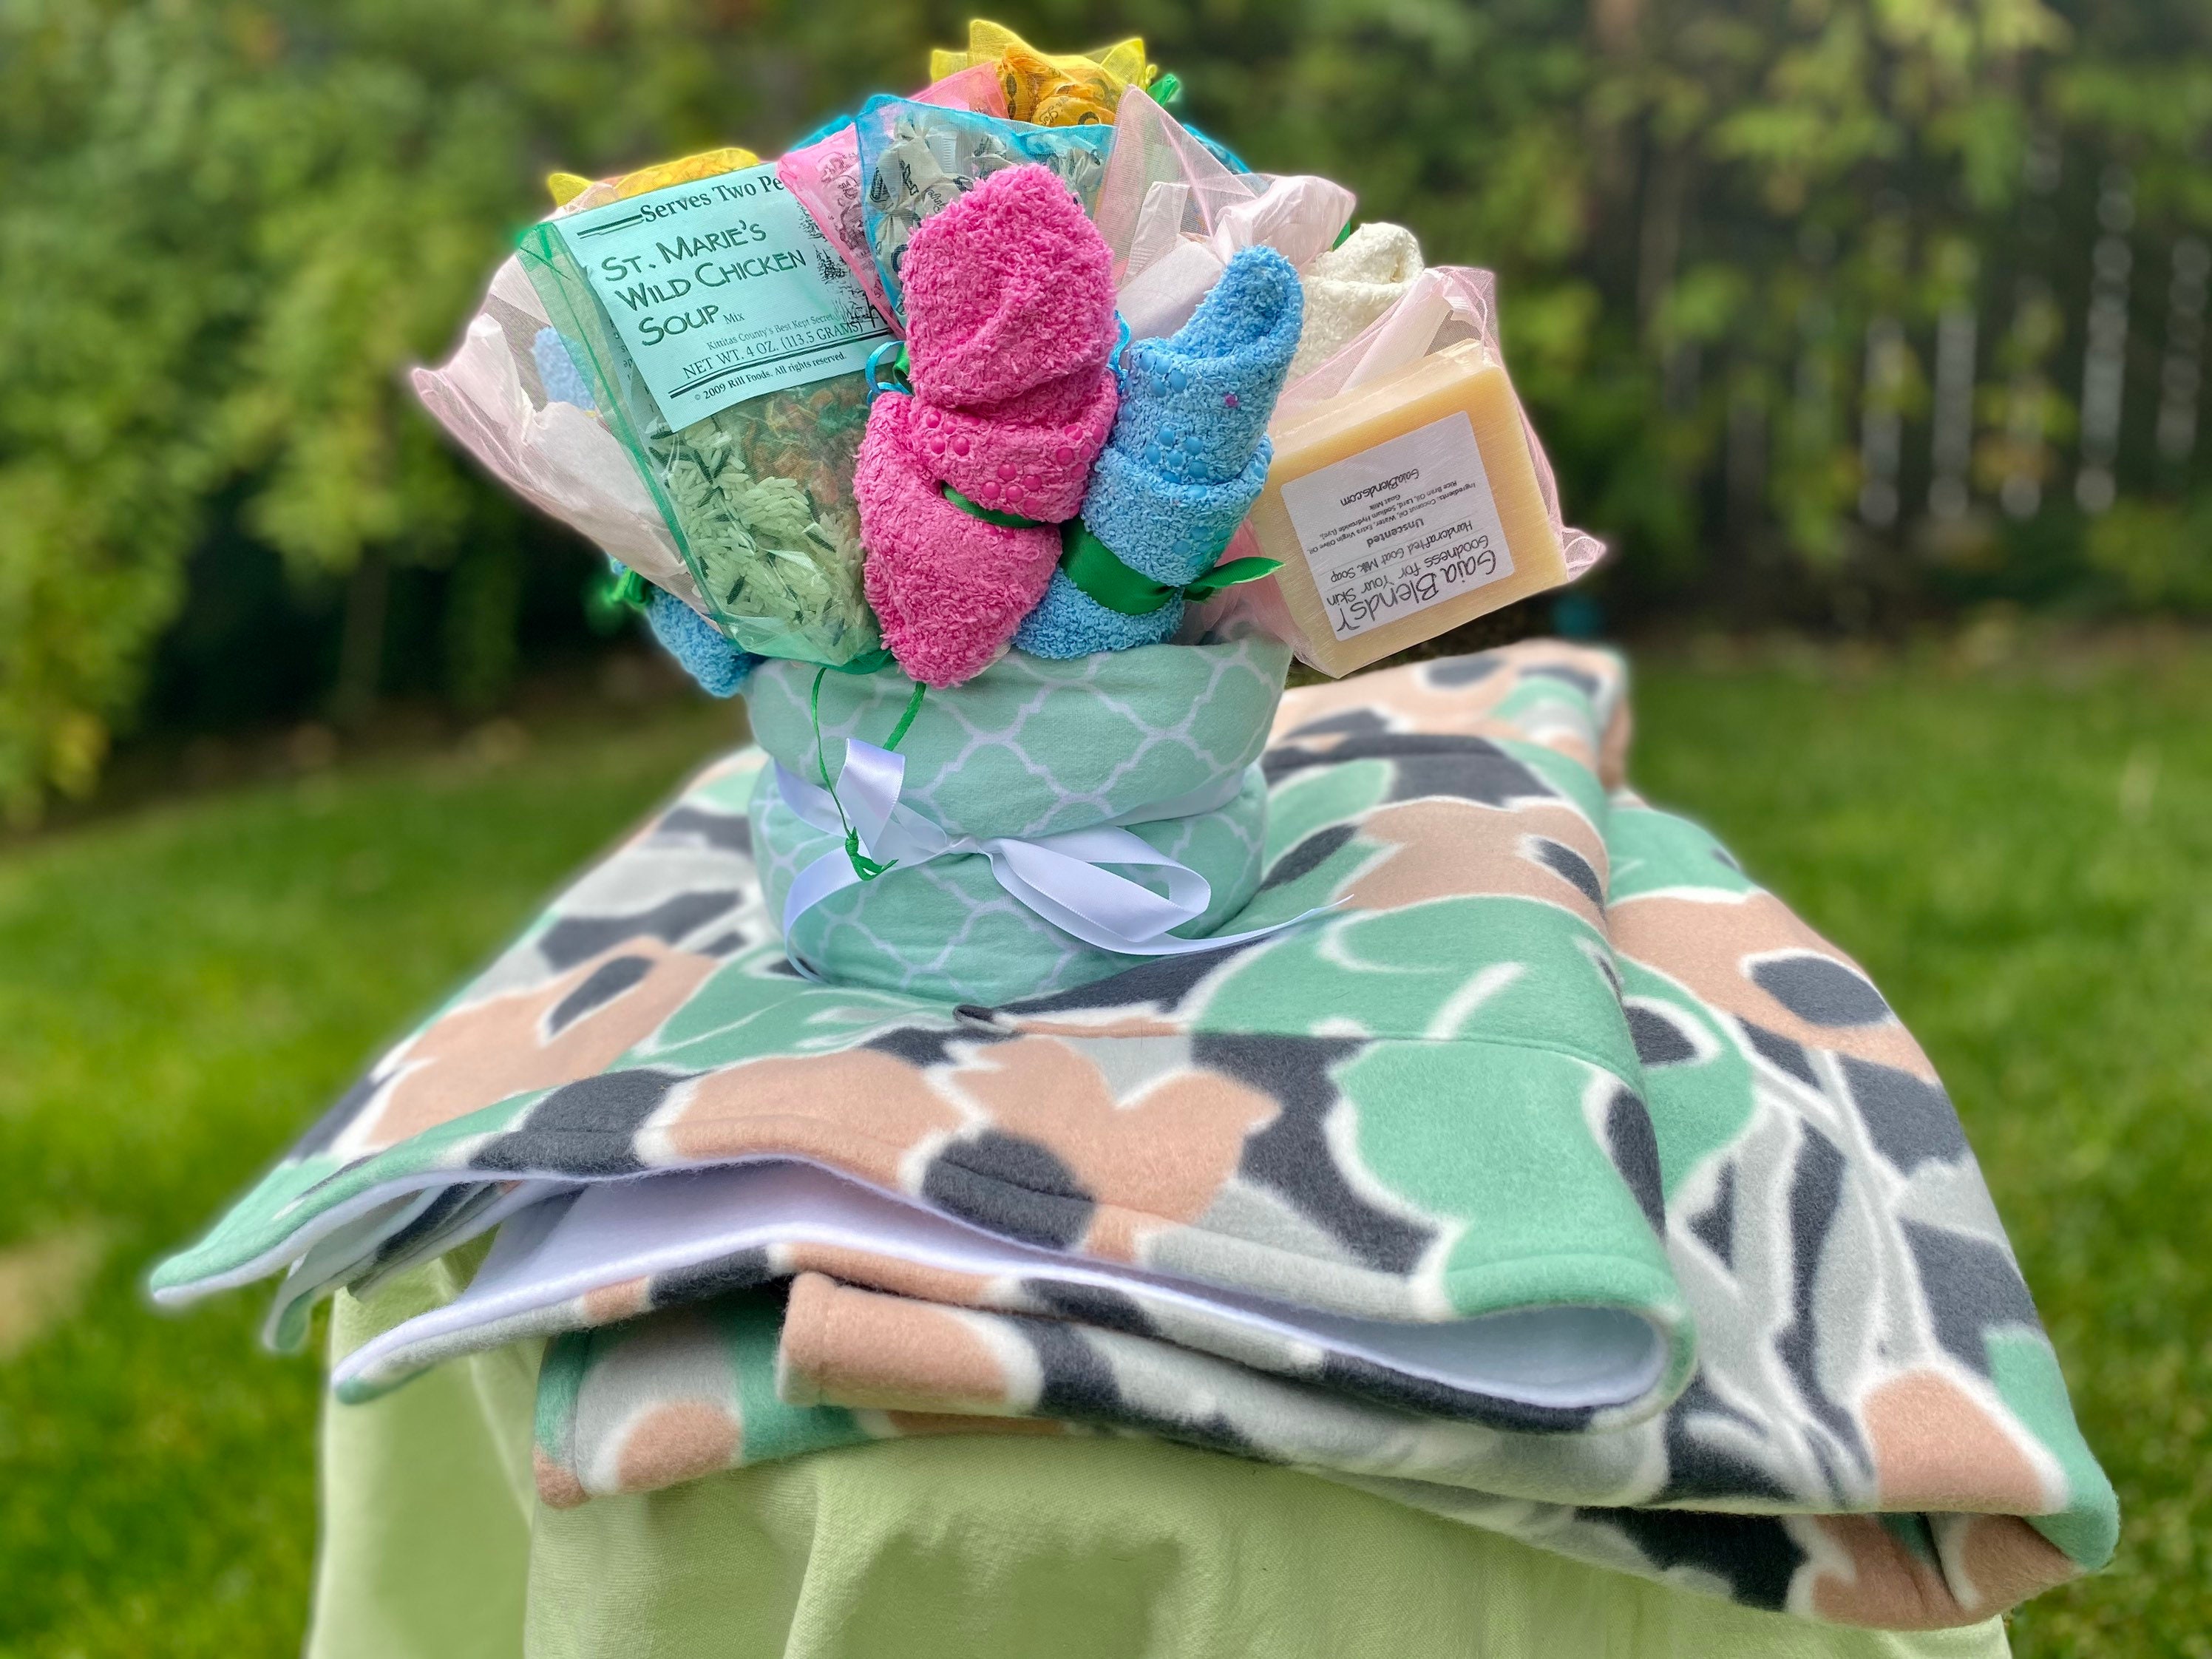 Minty Peach Cancer Care Package - A Bouquet Of Love Cancer Care Package, Get Well Soon Gift, Chemo Gift